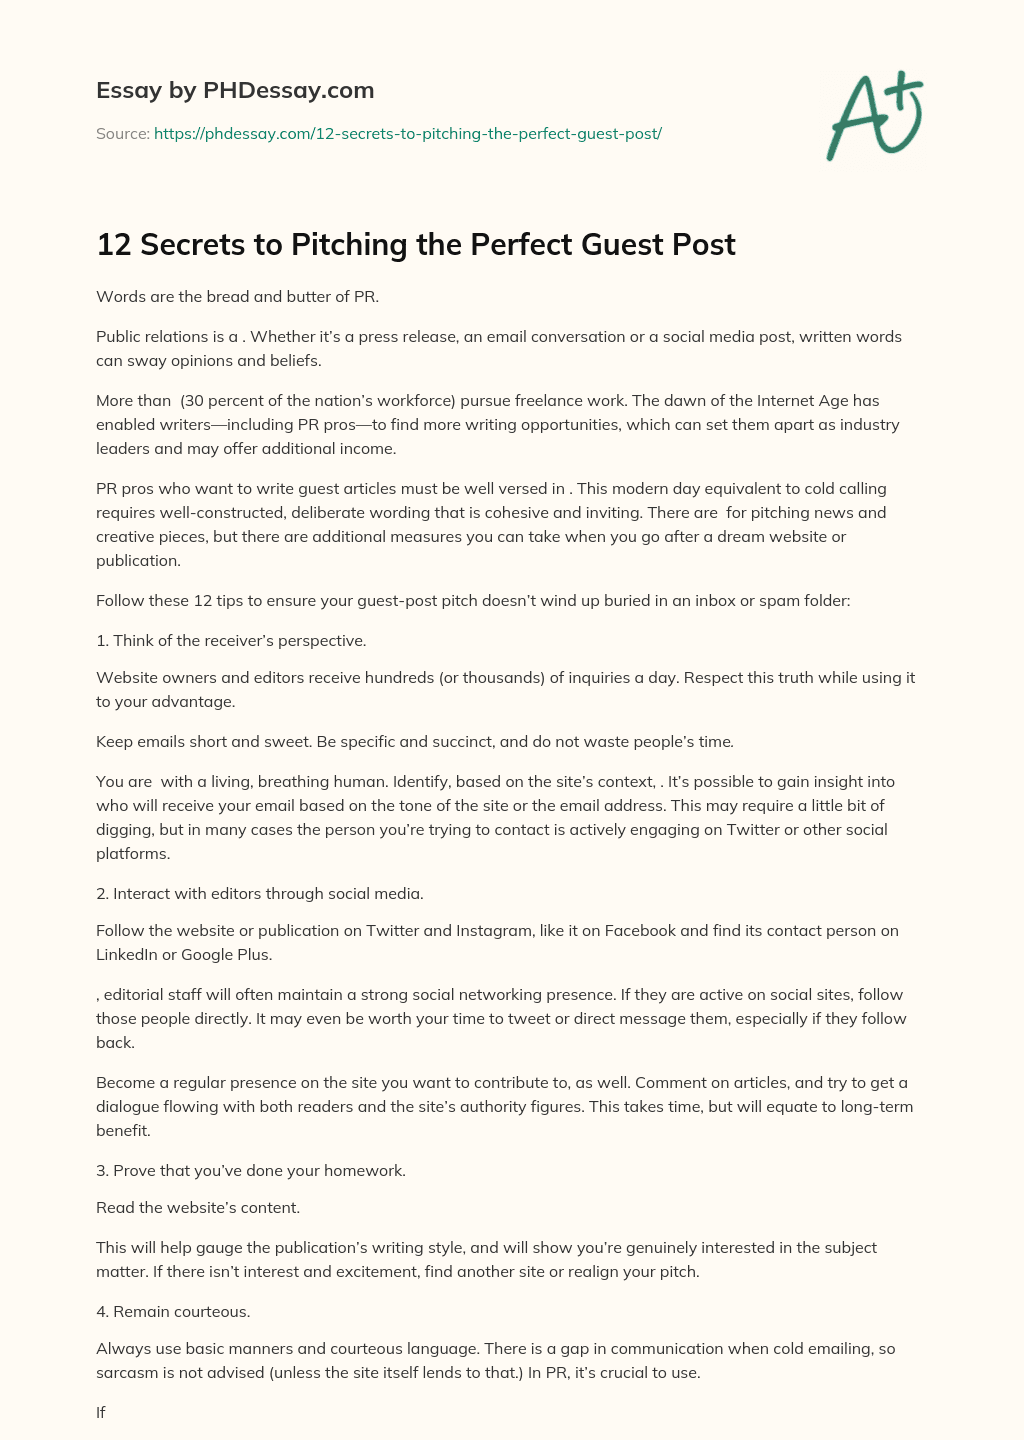 12 Secrets to Pitching the Perfect Guest Post essay